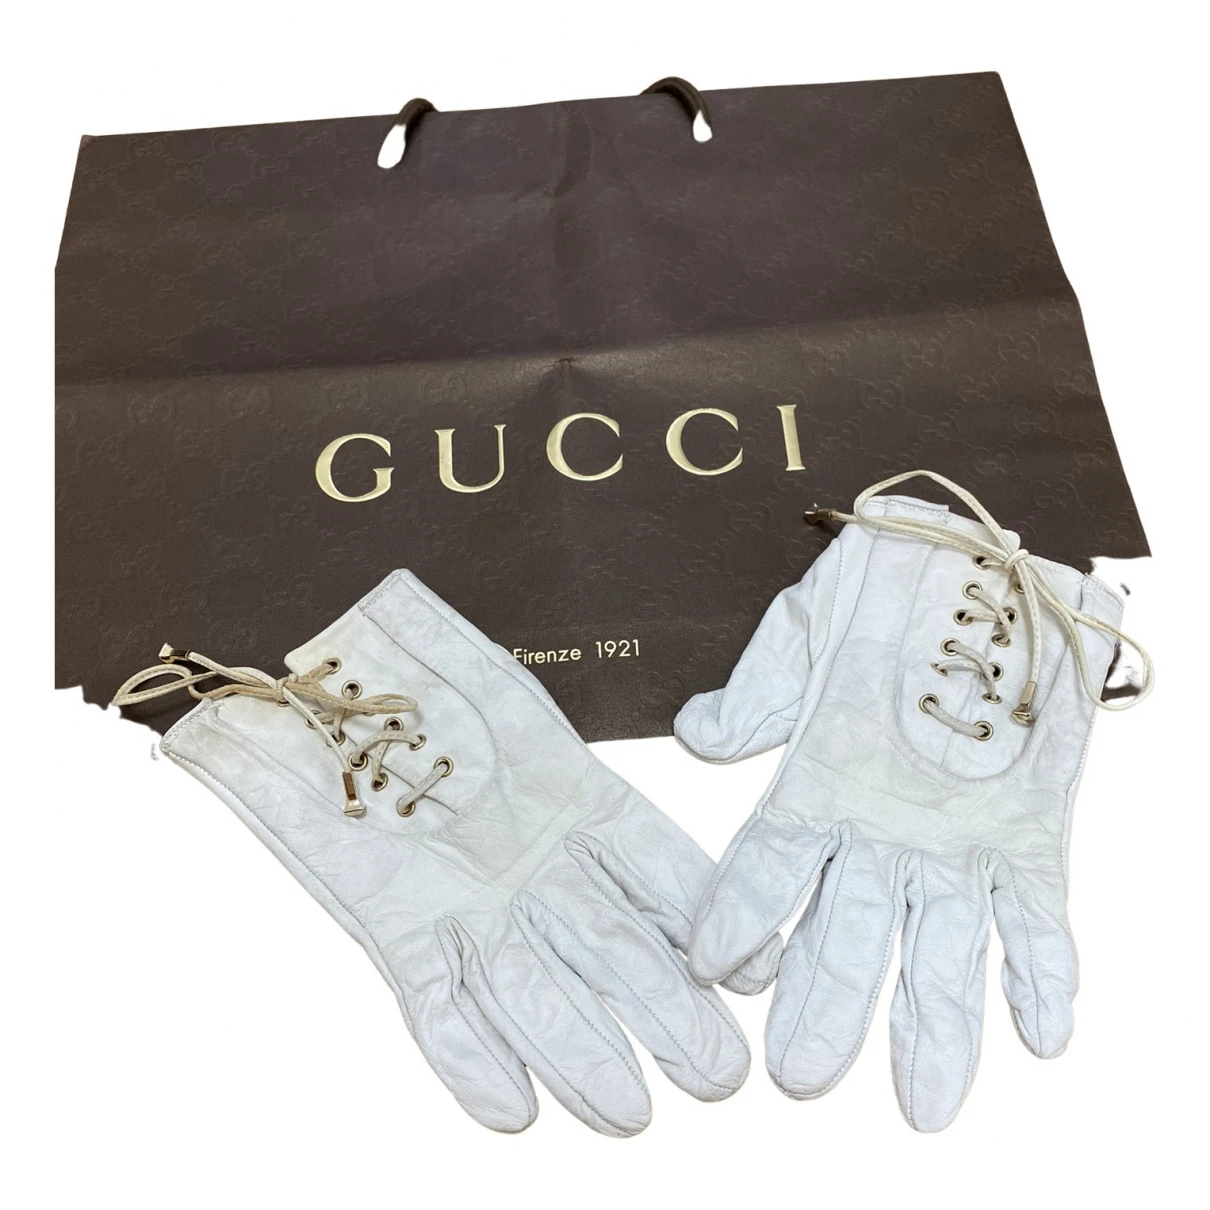 accessories Gucci gloves for Female Leather 7.5 Inches. Used condition